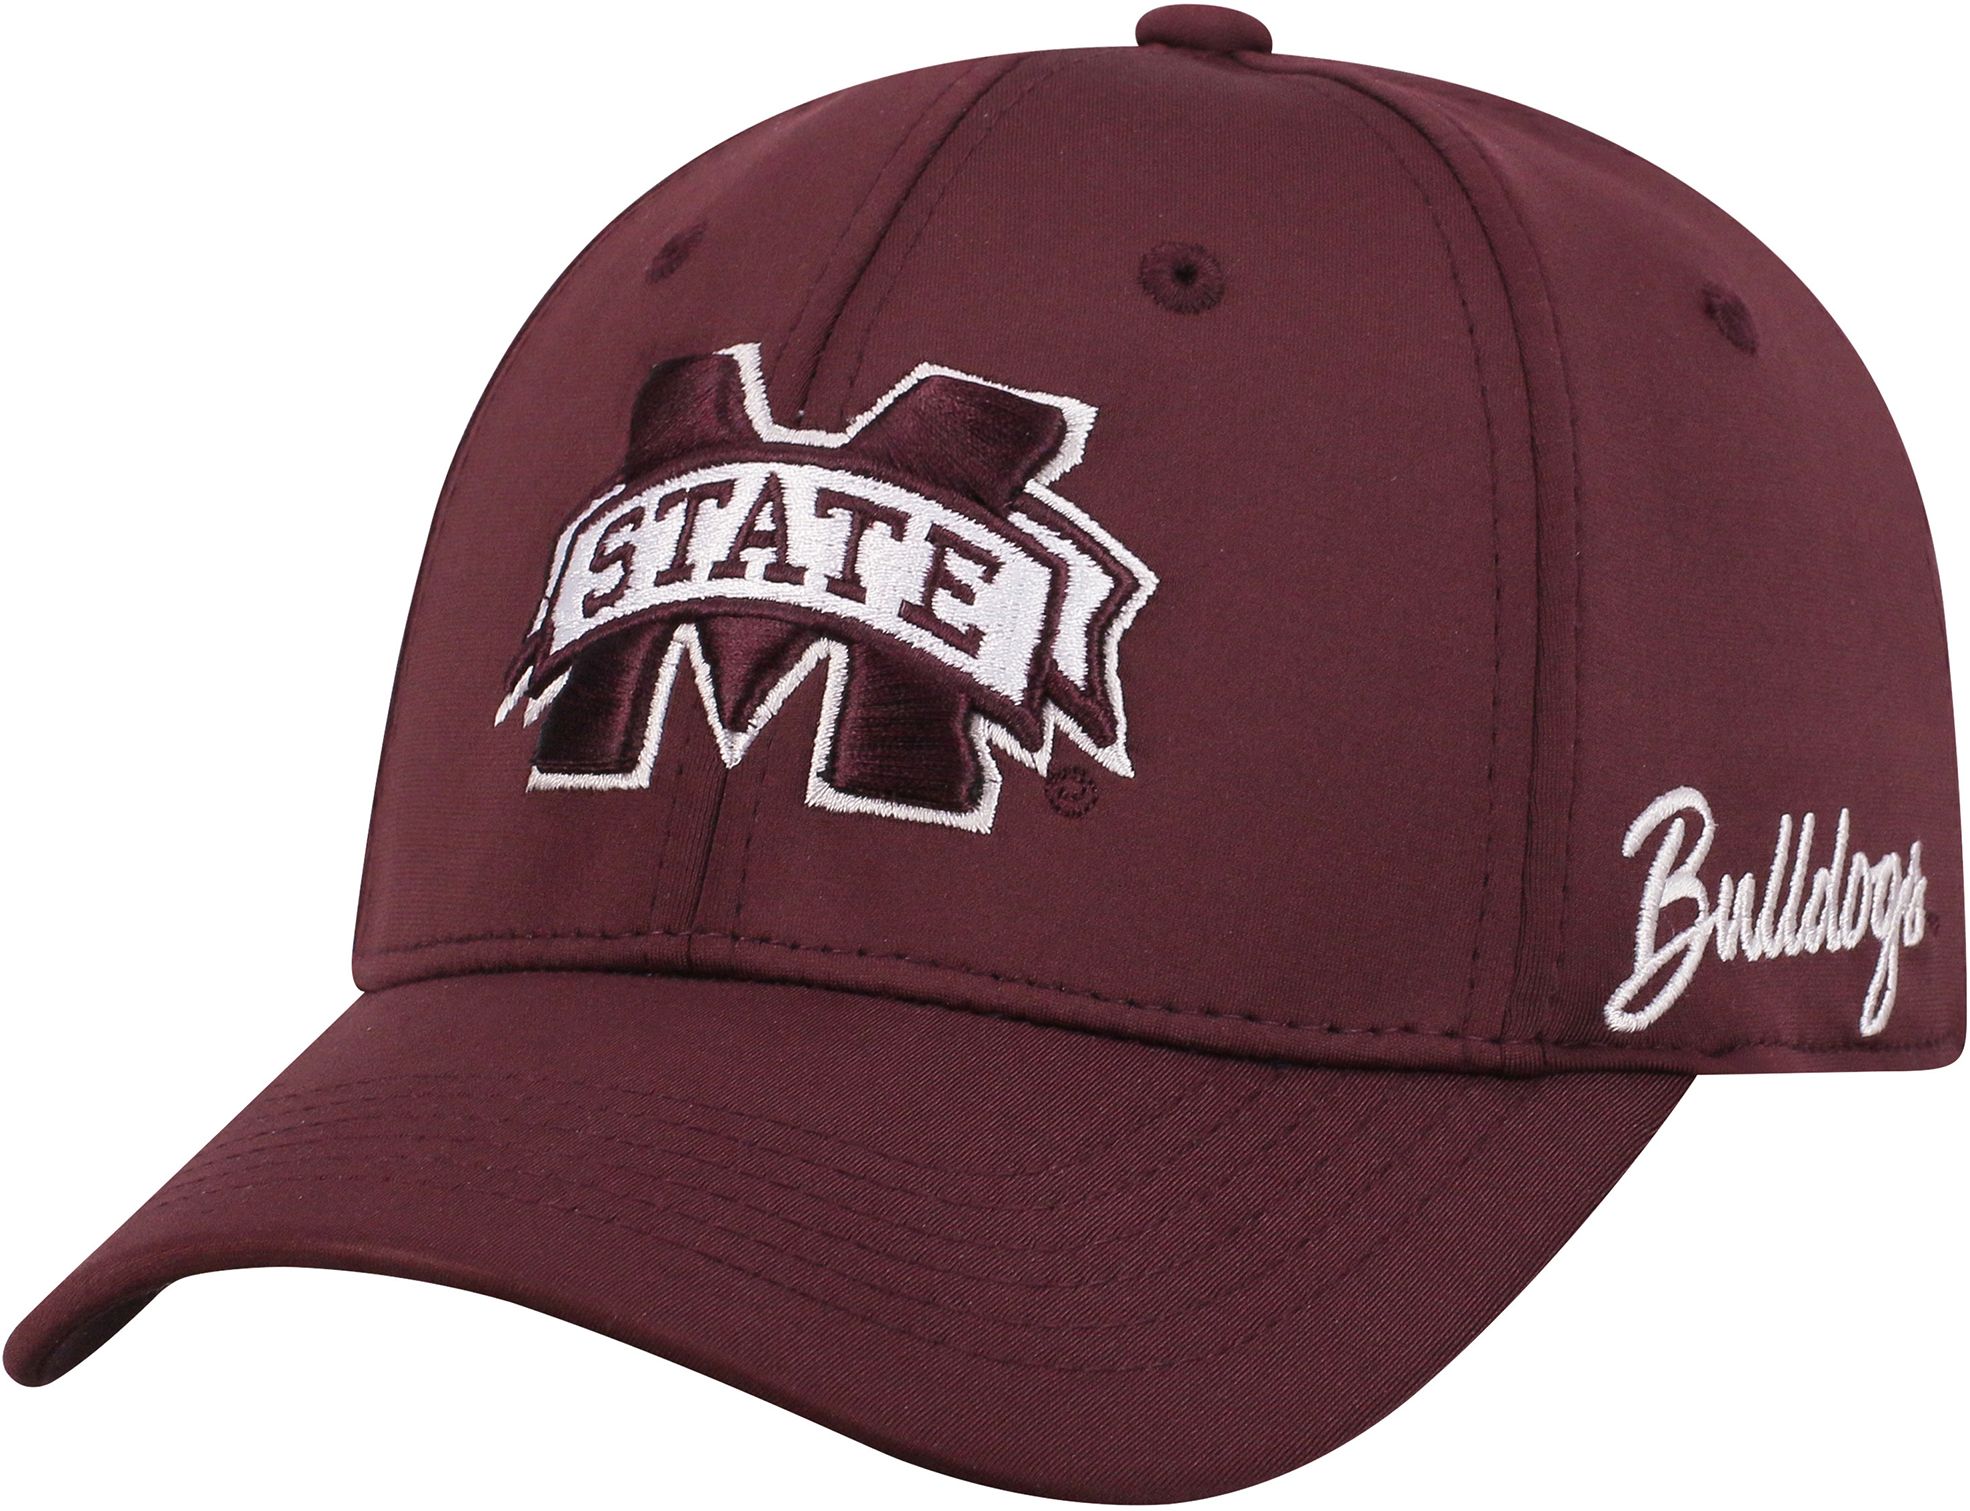 mississippi state adidas fitted baseball hat